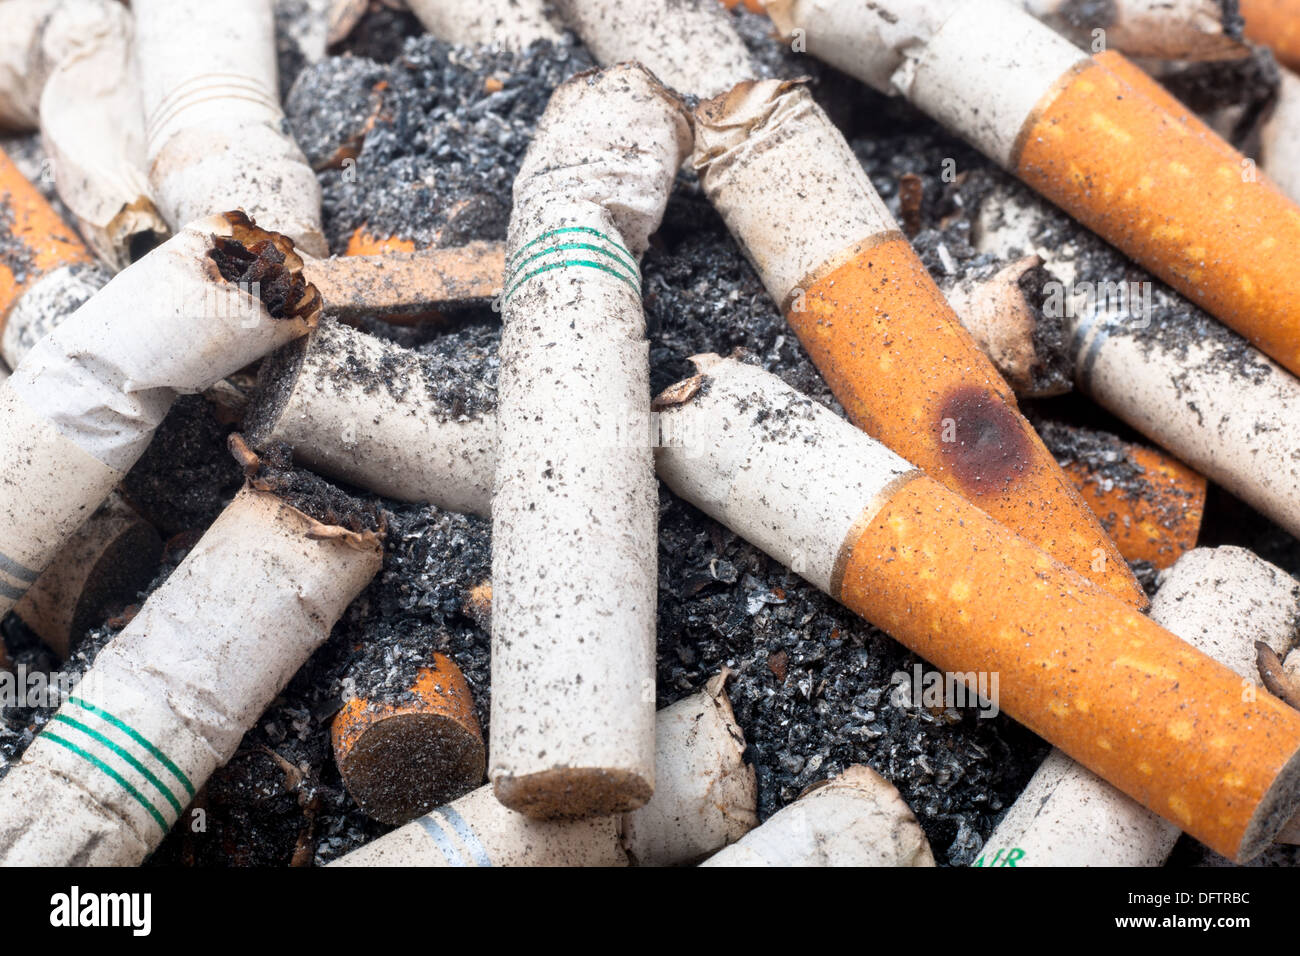 Pile of cigarette butts/stubs Stock Photo